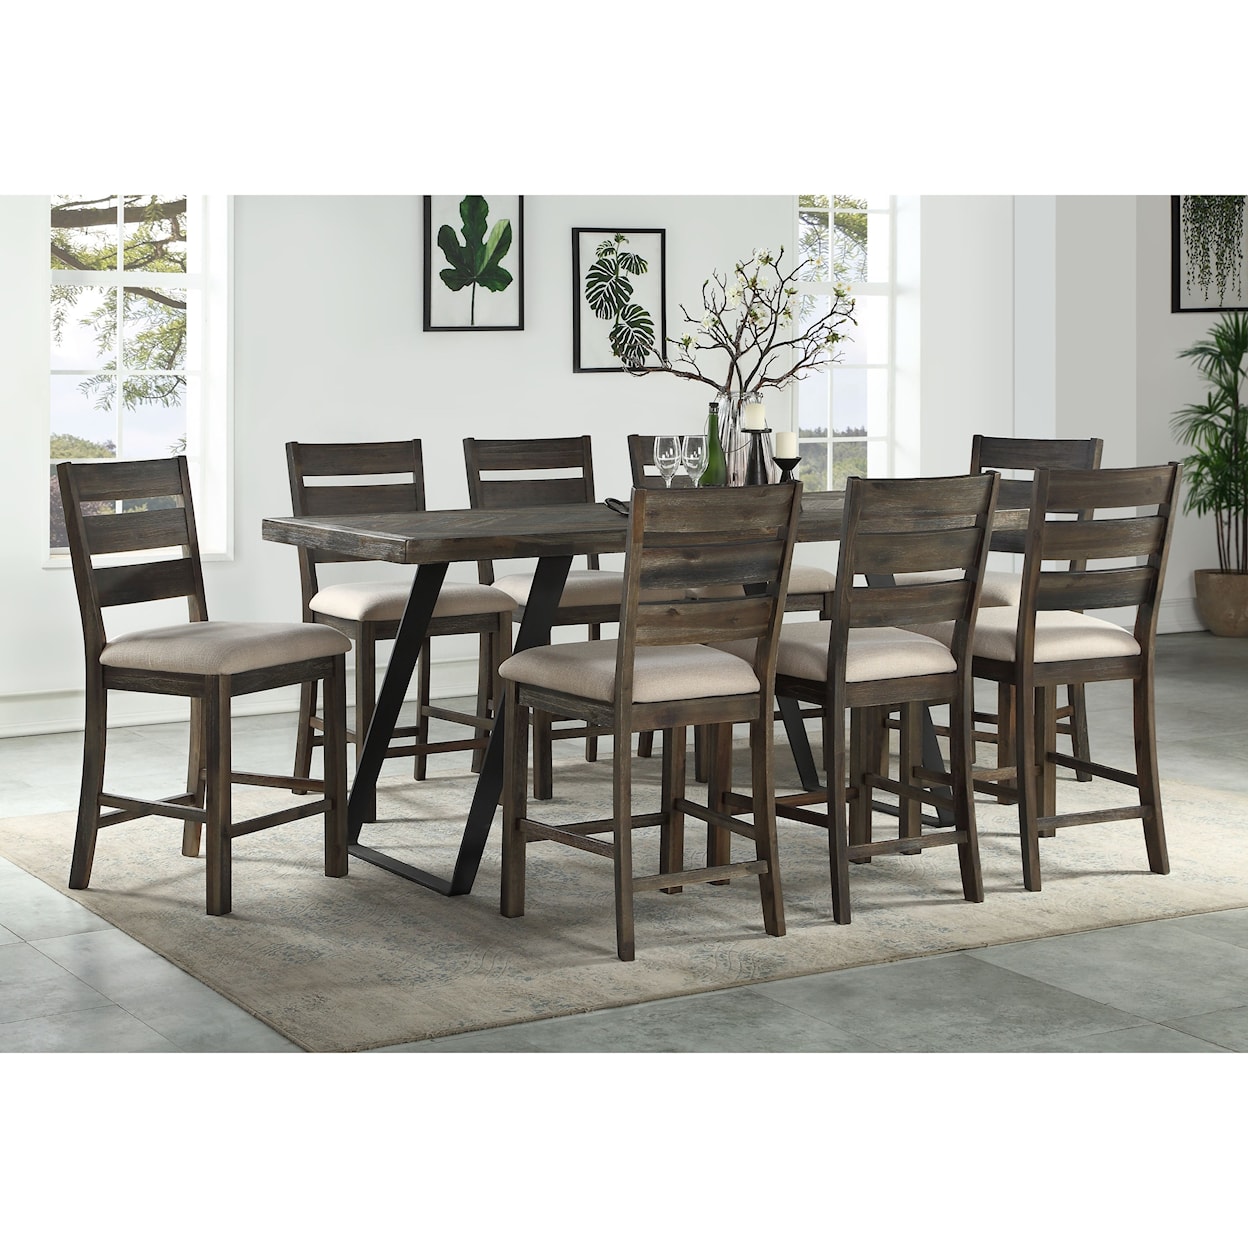 Coast2Coast Home Aspen Court 9-Piece Counter-Height Table and Chair Set